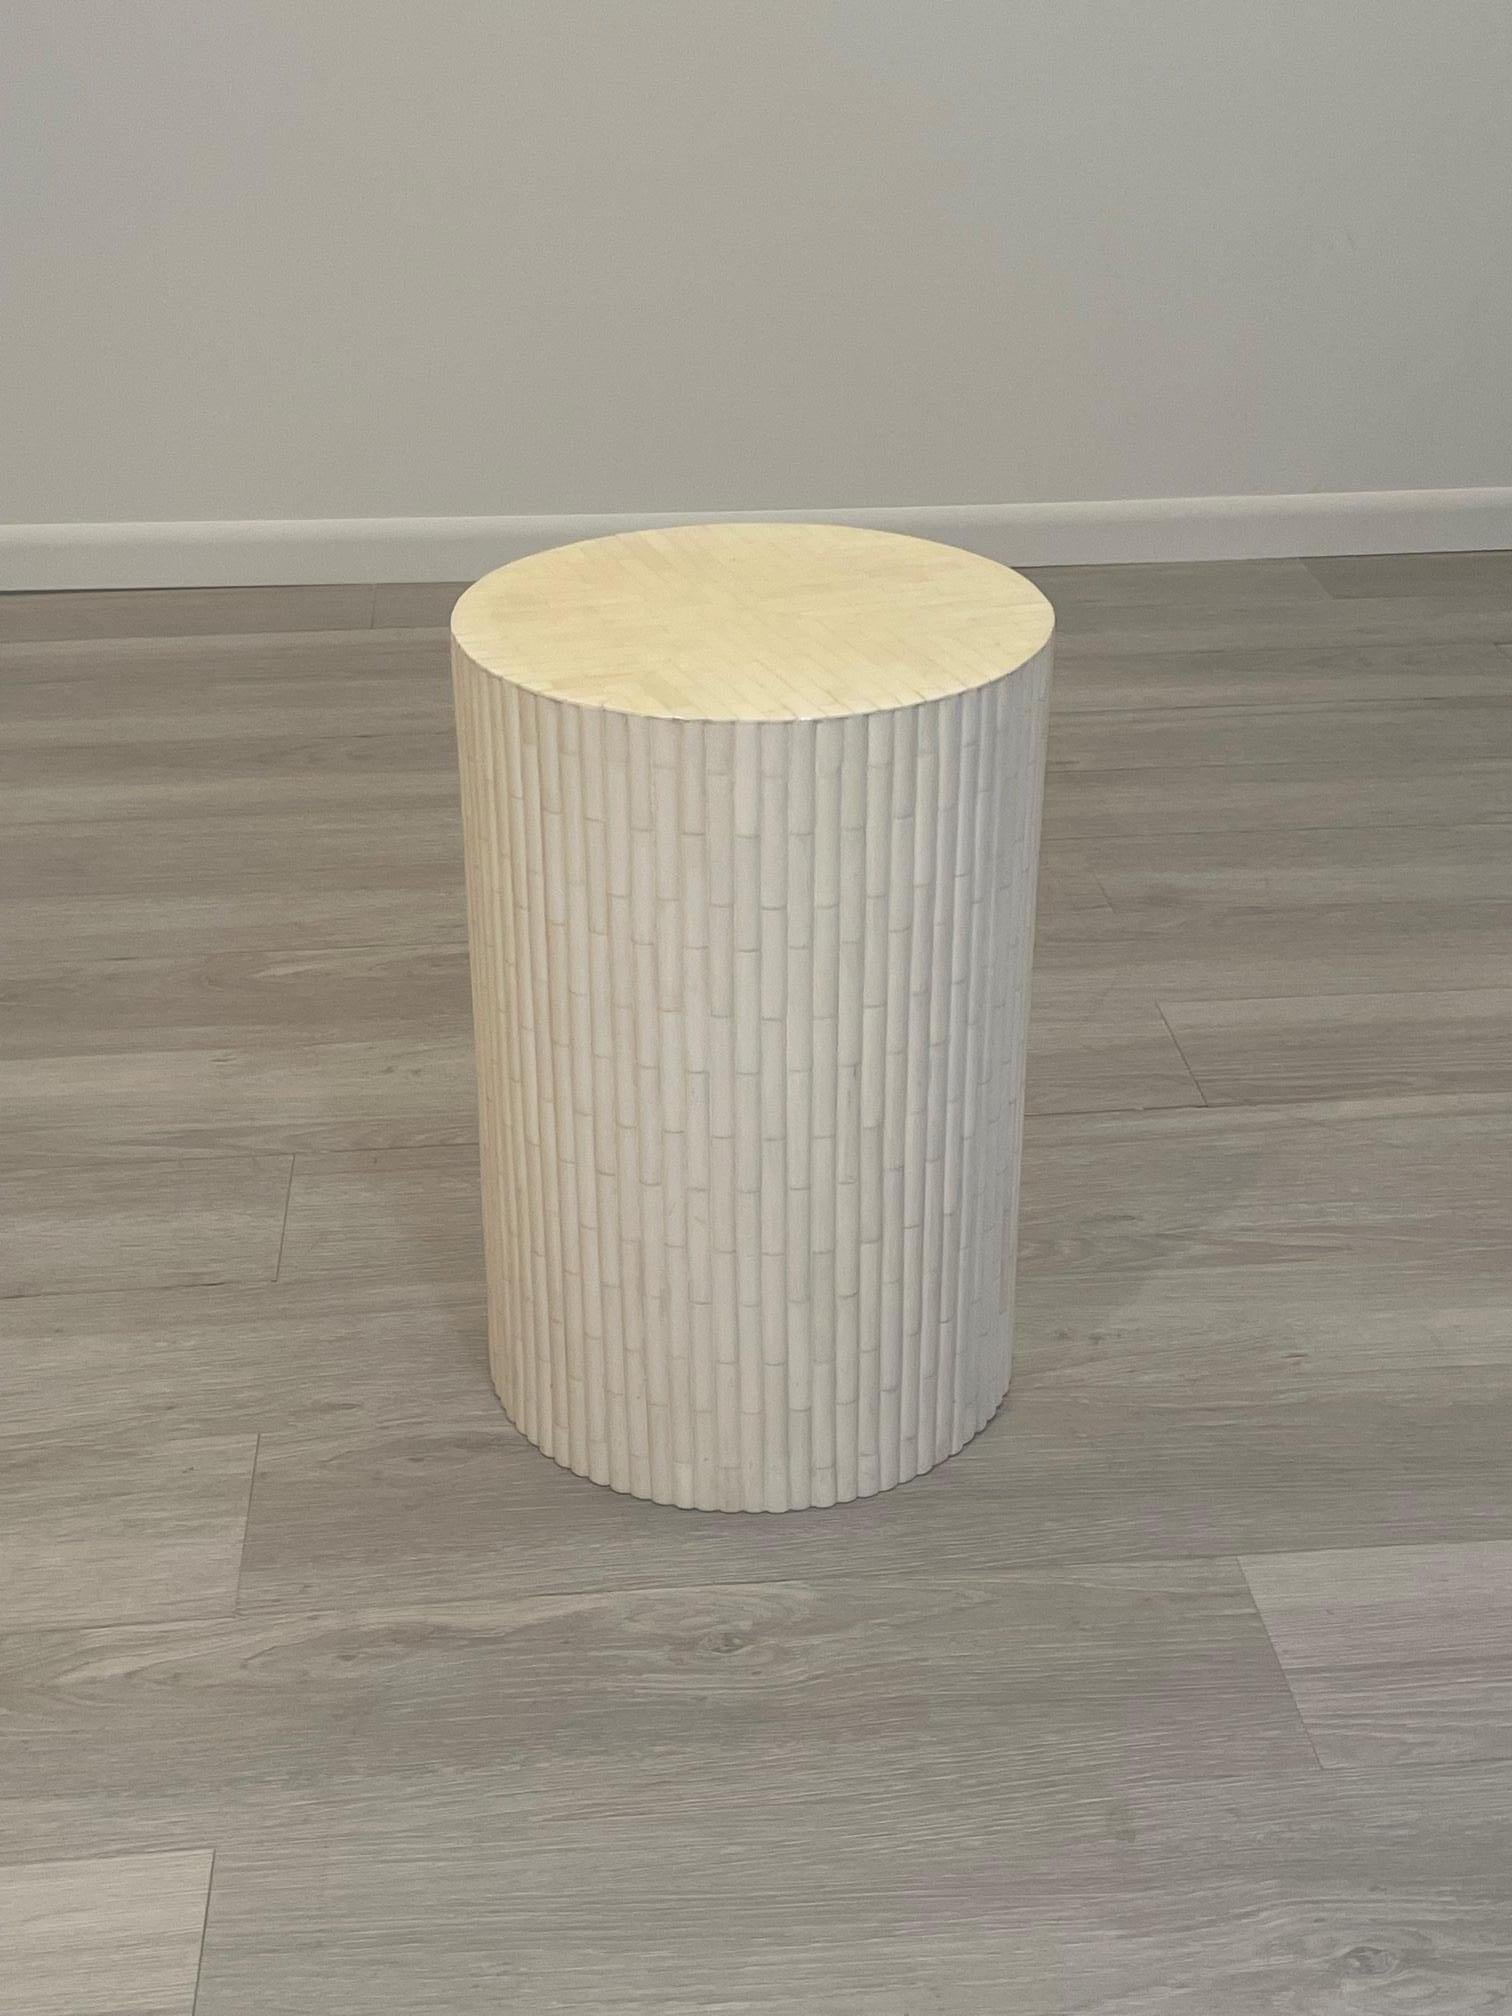 Chic sophisticated and versatile round cream colored tessellated round side drinks table having ribbed body that has a faux bamboo vibe.